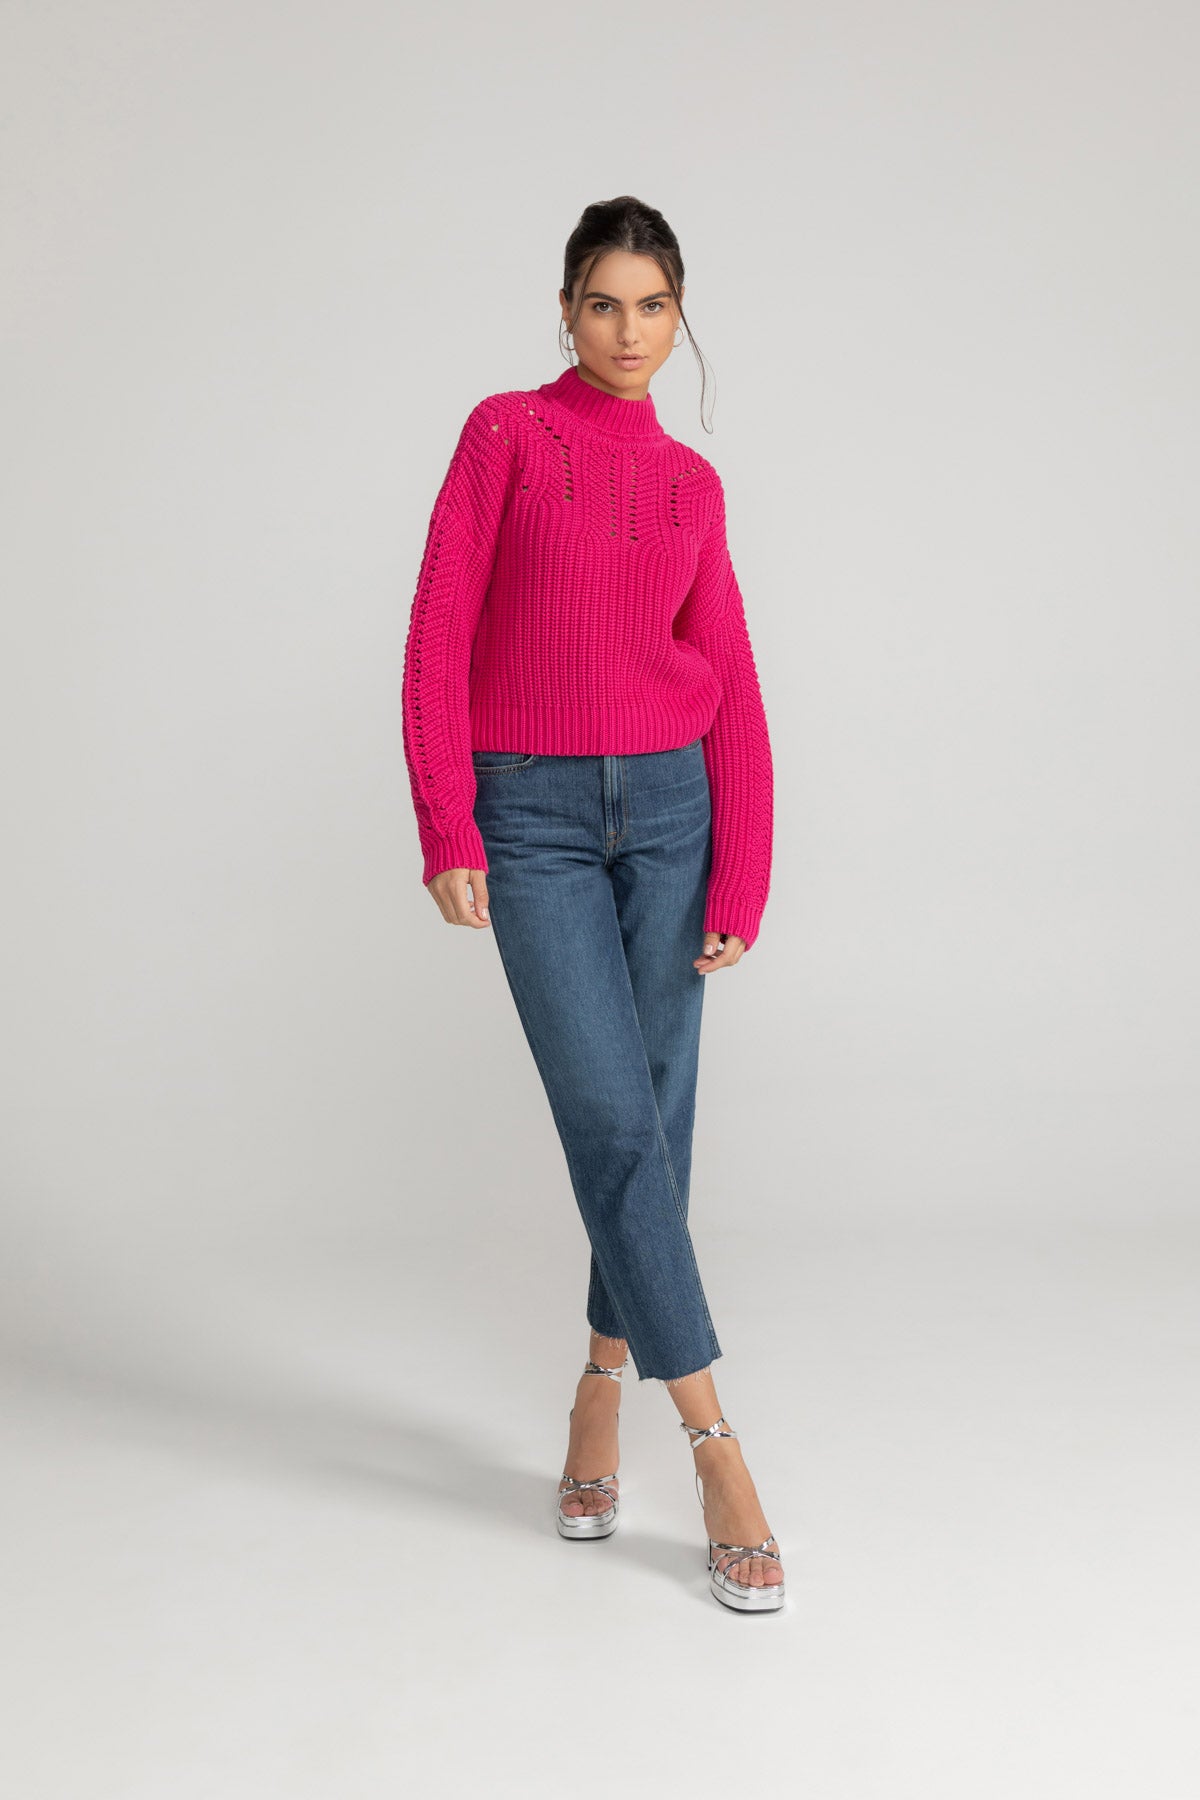 ALEIKA sweater in pink by LOVJOI made of organic cotton